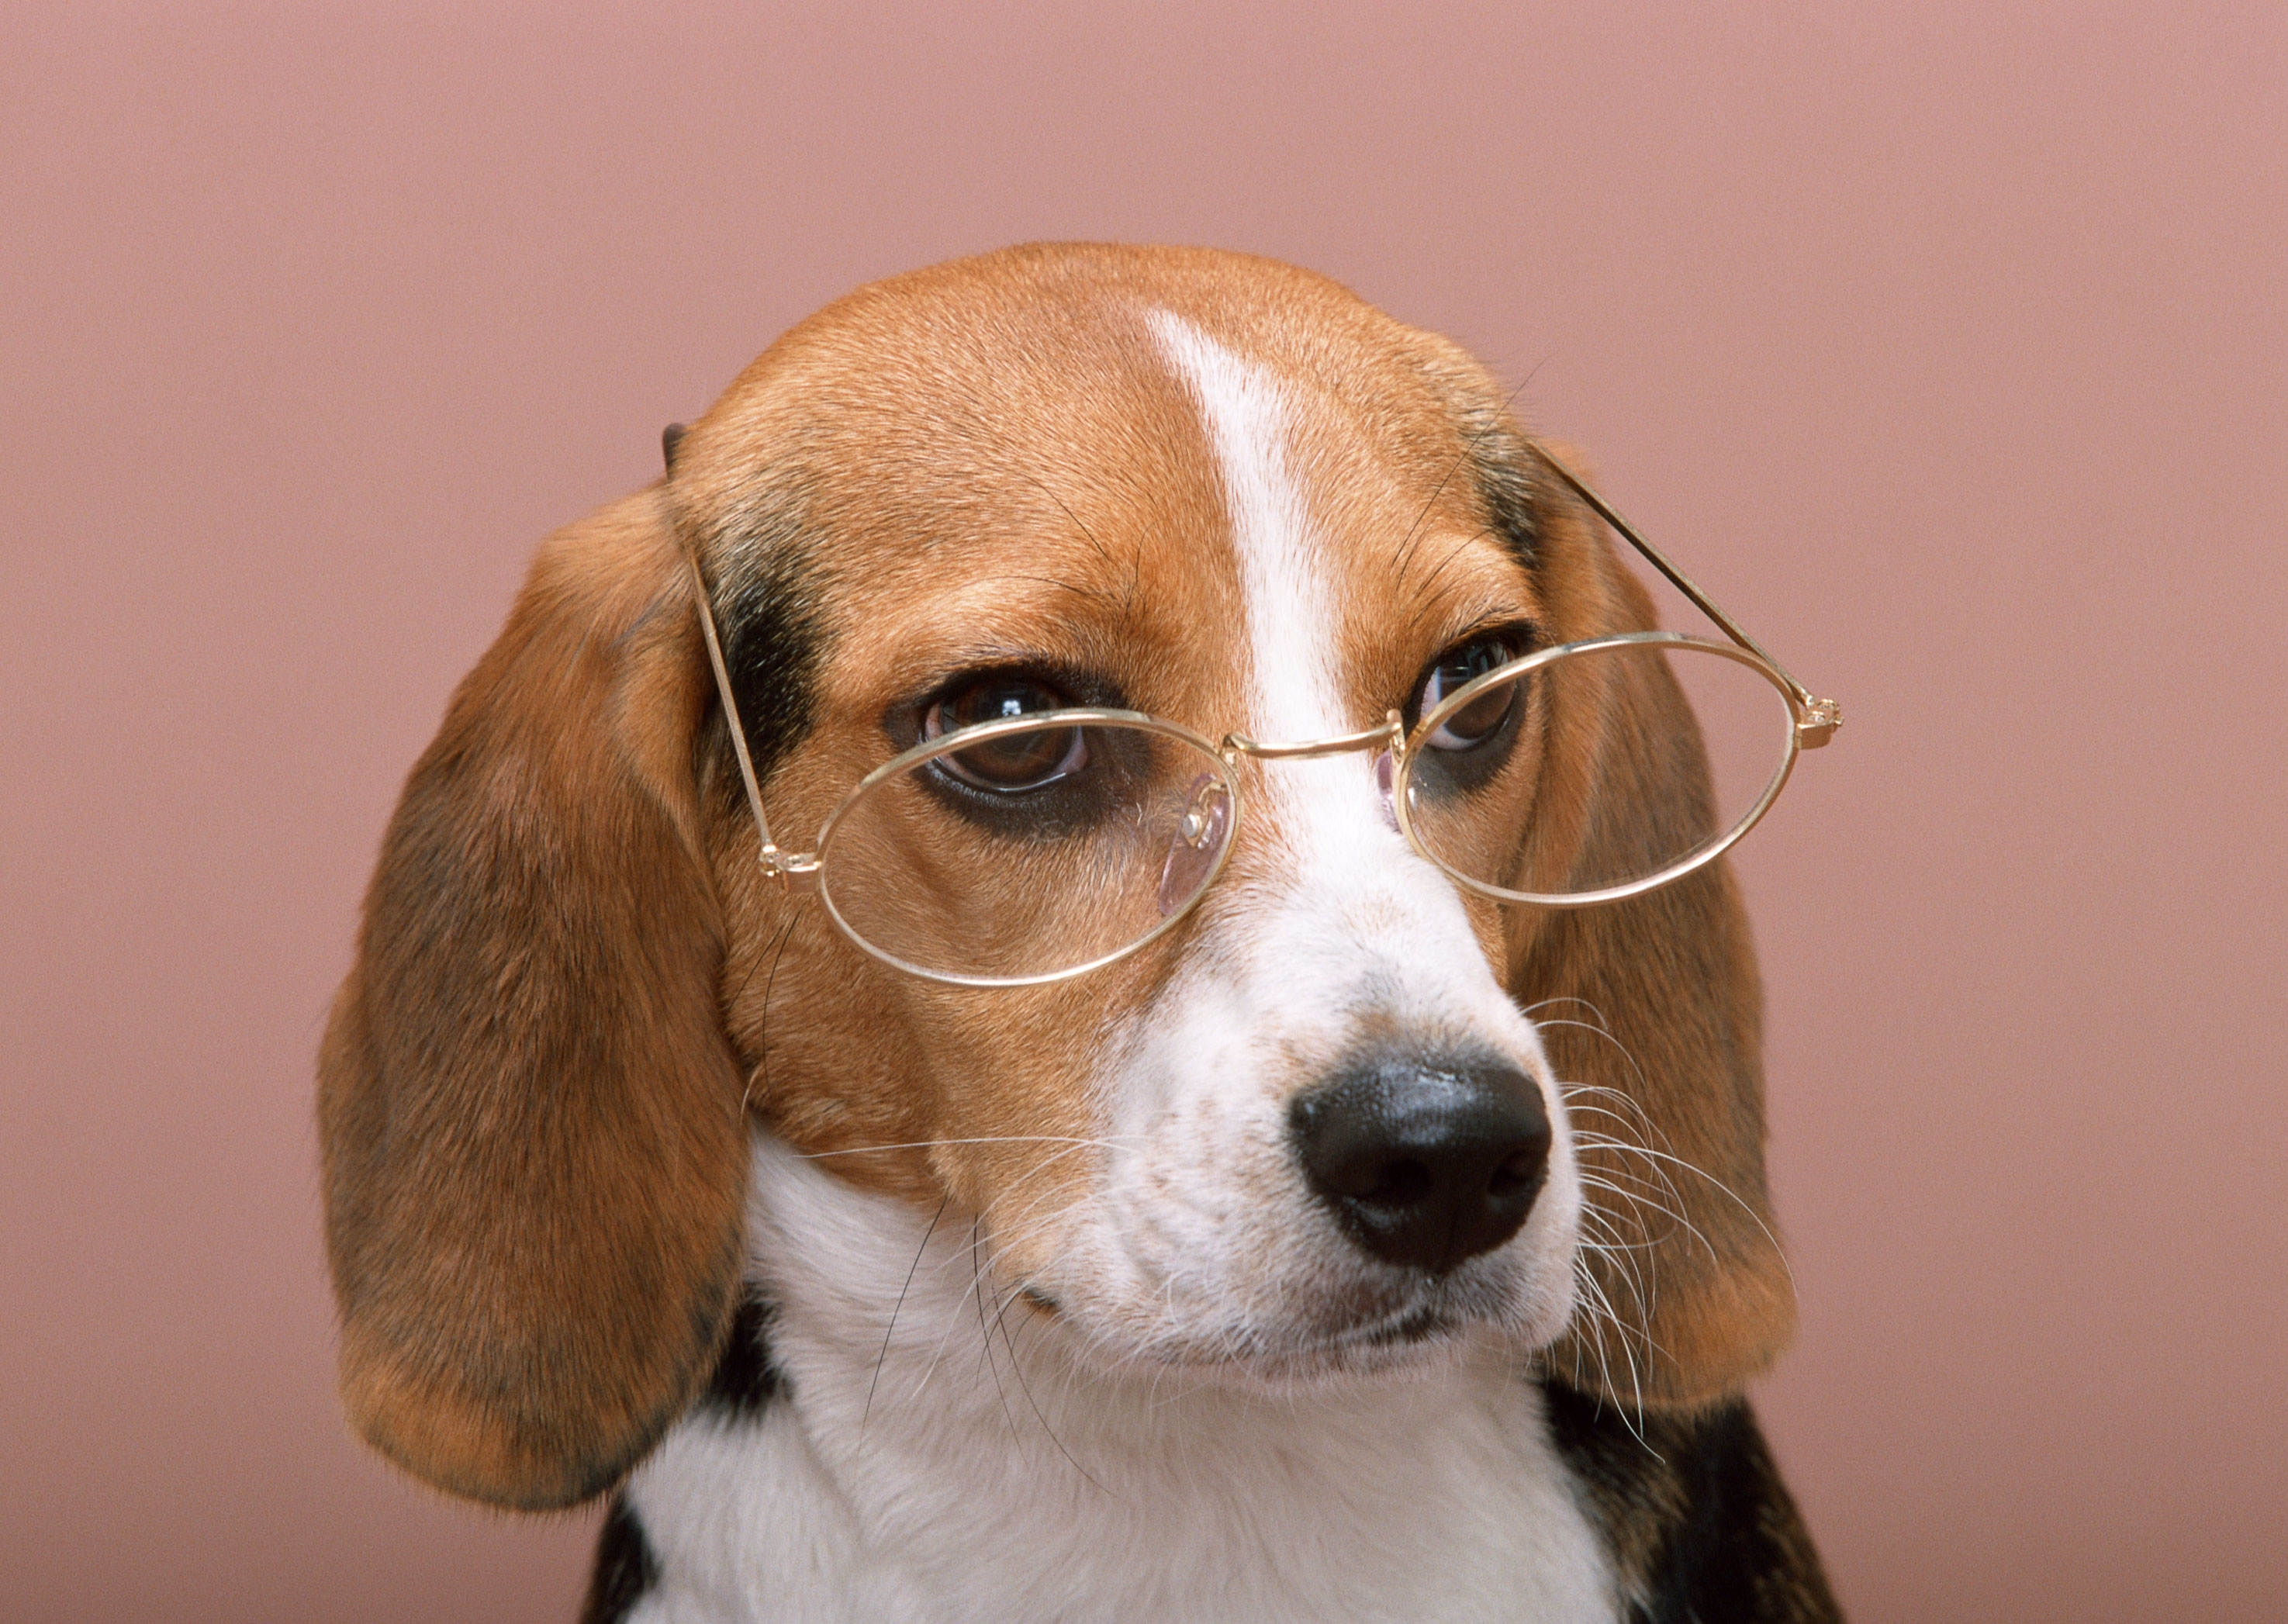 HD wallpaper animals, dog, glasses, spectacles, pink background